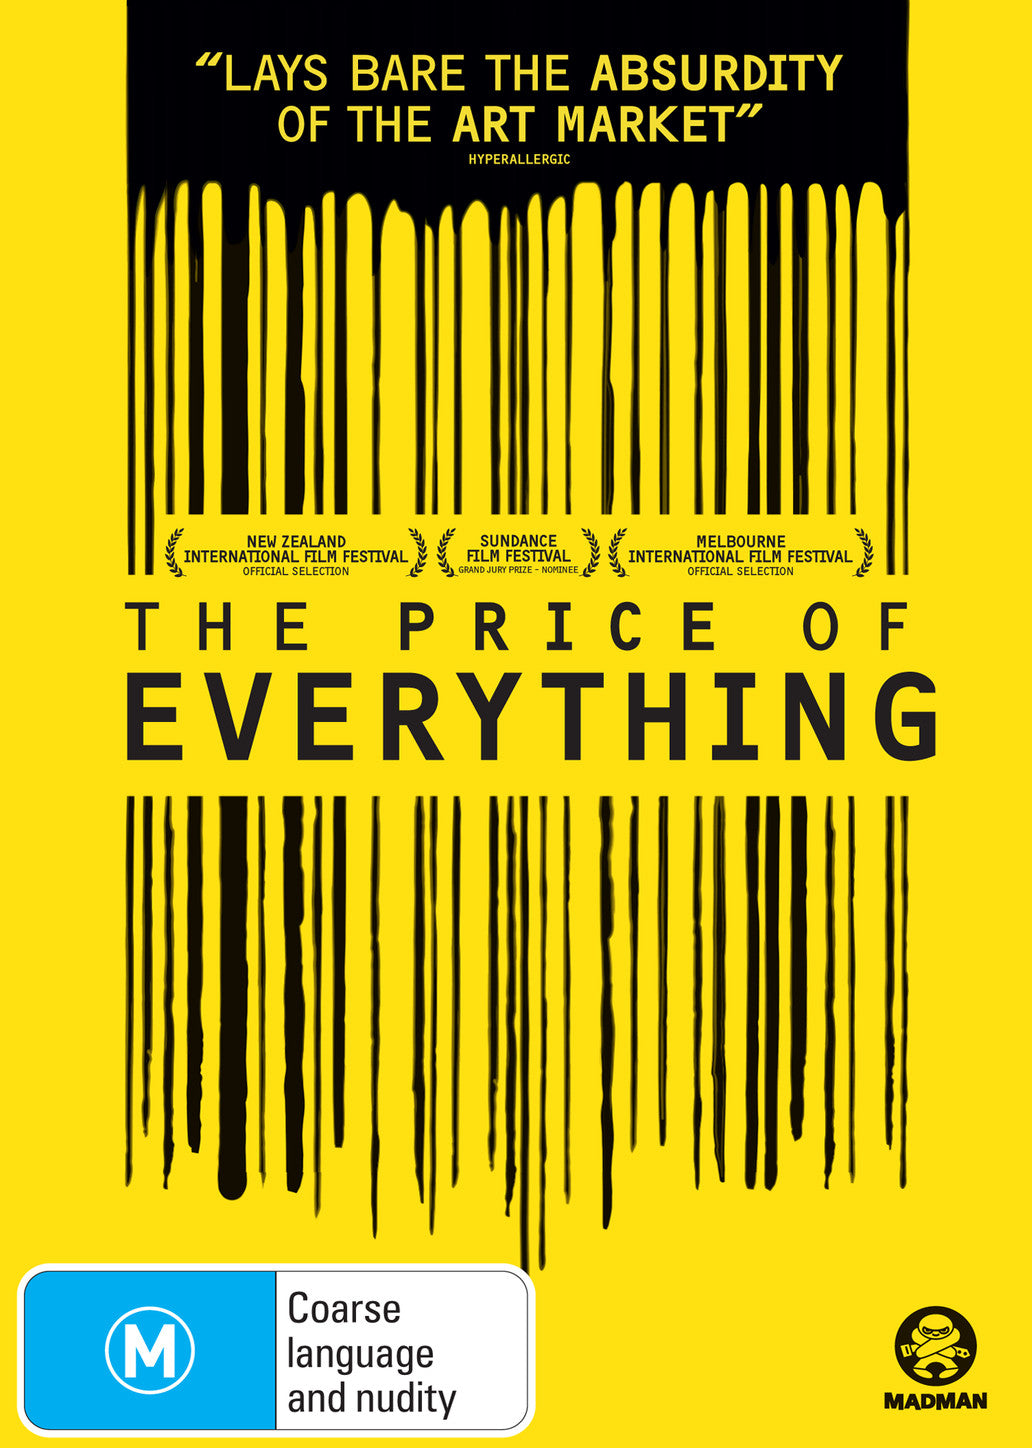 THE PRICE OF EVERYTHING